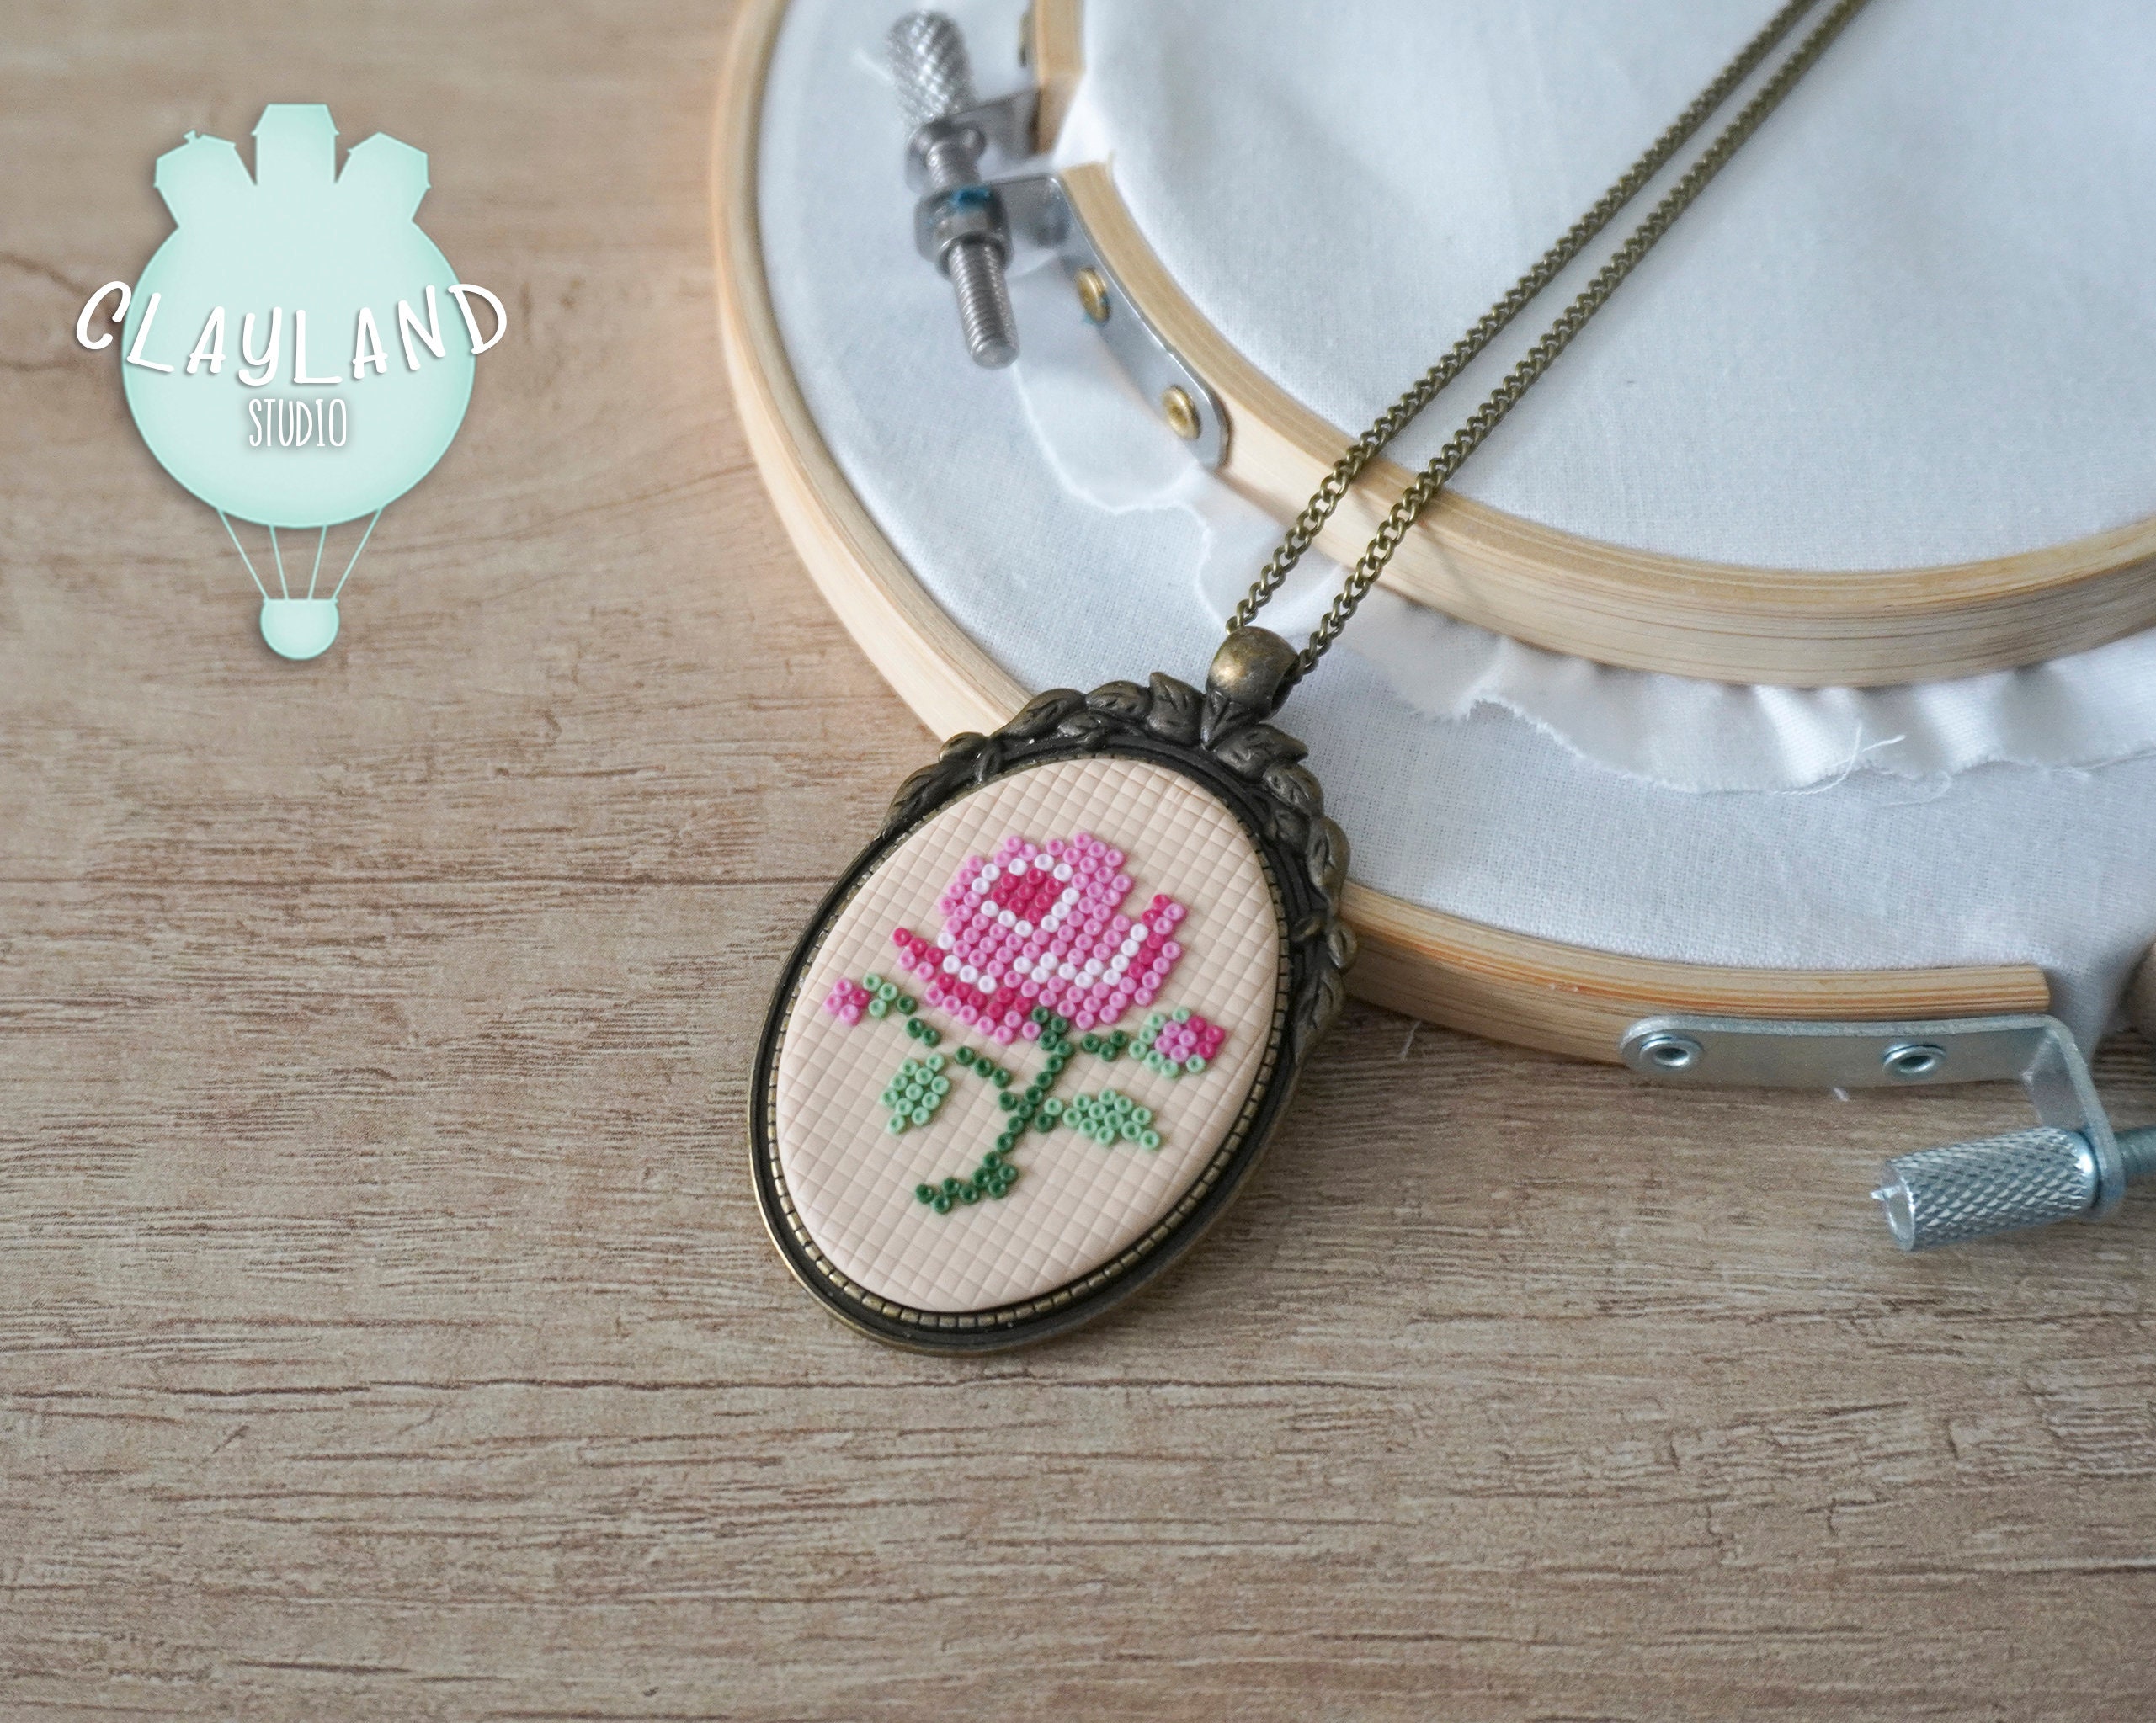 Cross Stitch Necklace Embroidery Necklace Floral Pendant 